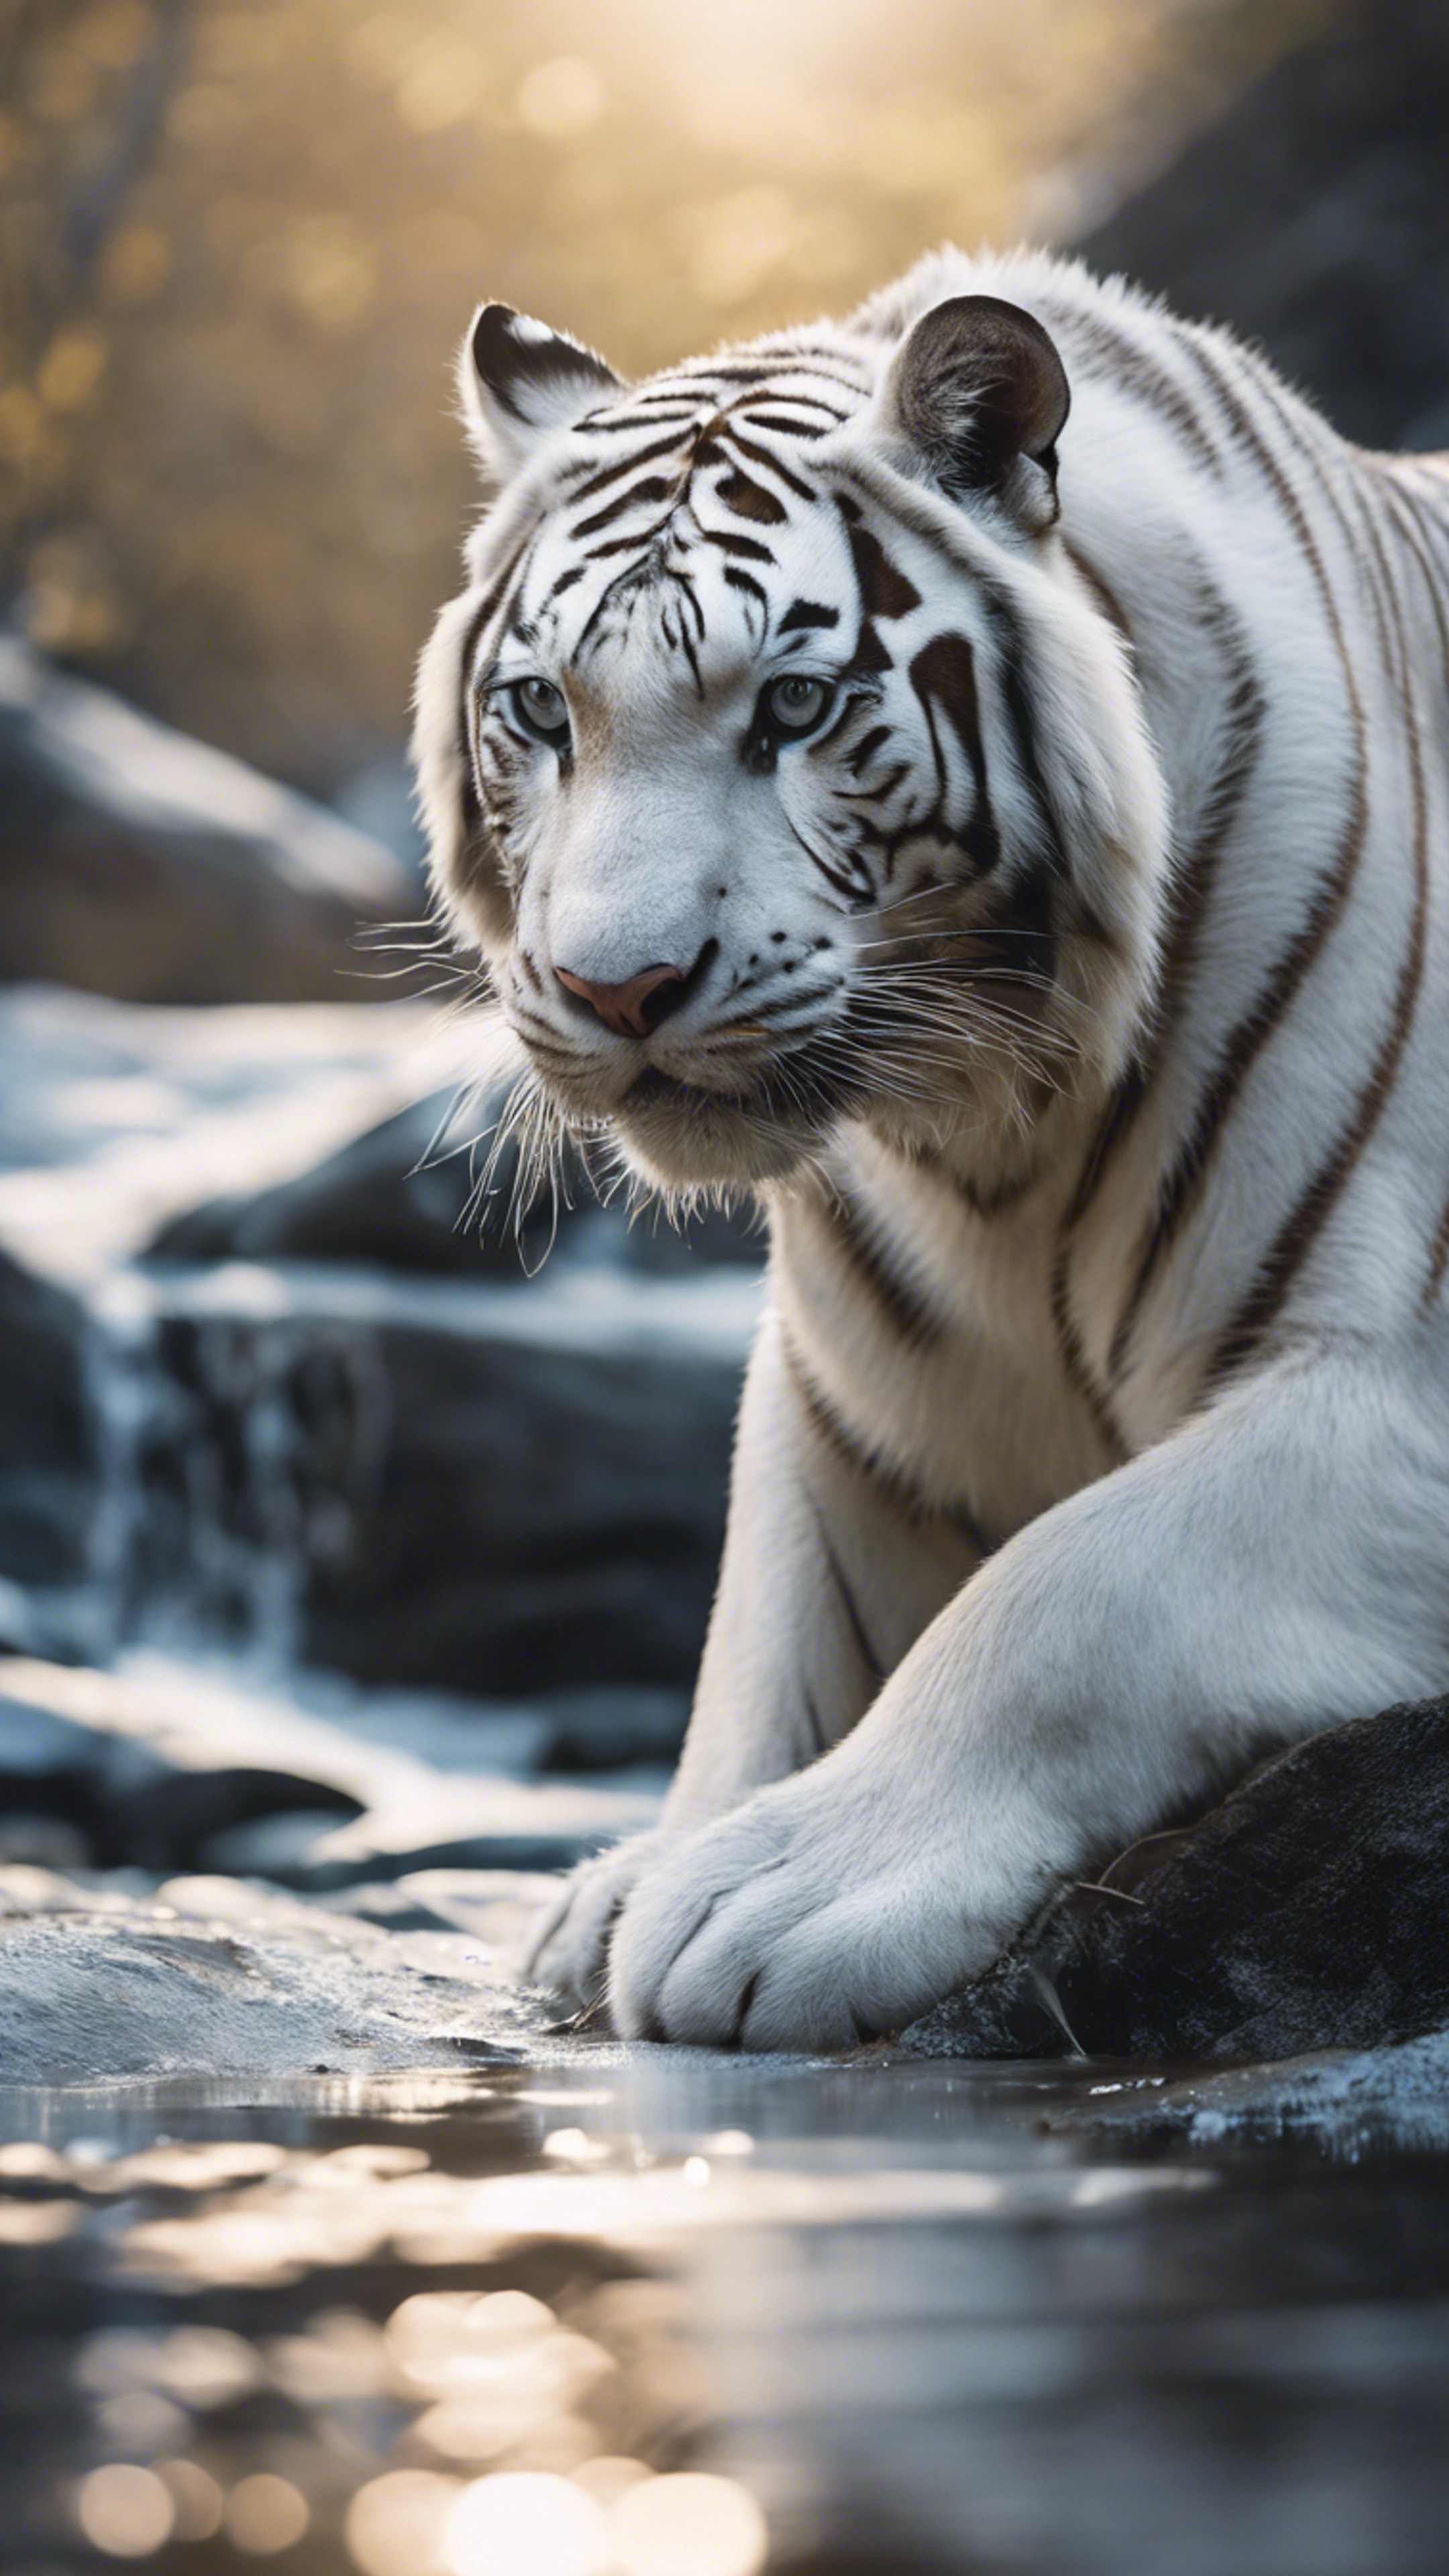 White Bengal tiger crouching near a cold mountain stream, ready to pounce Wallpaper[60014ca7a56b4b479206]